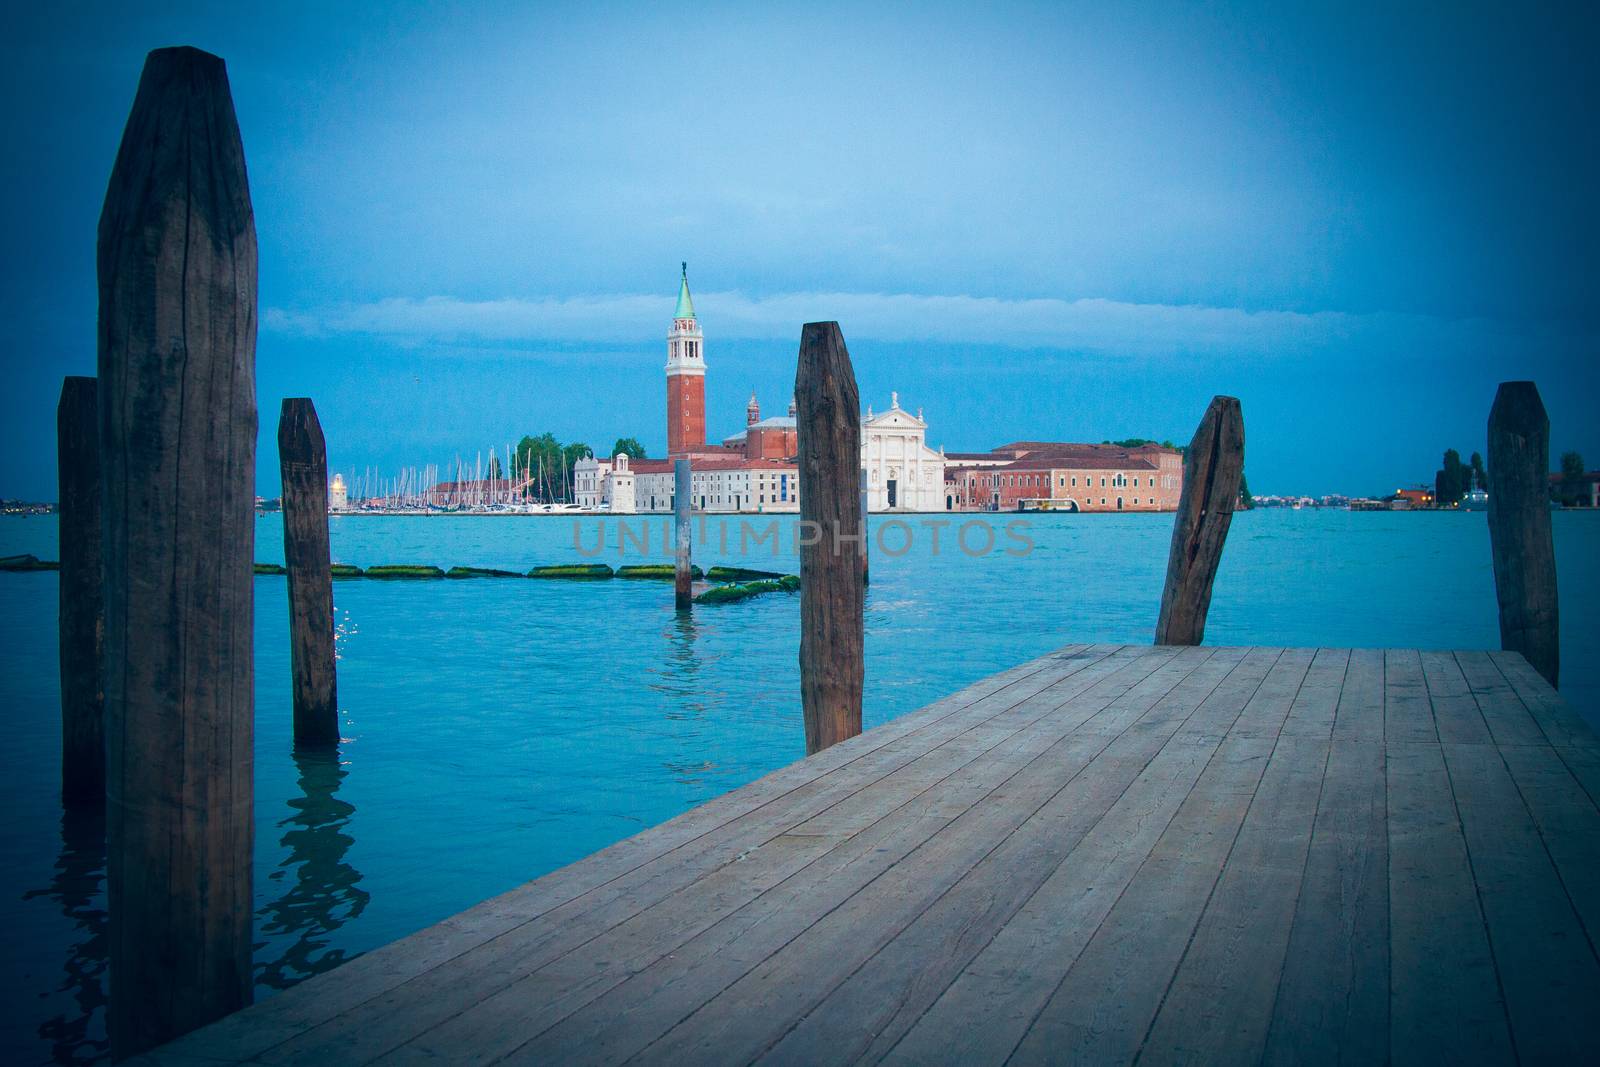 San Marco in Venice at dusk on the Grand Canal